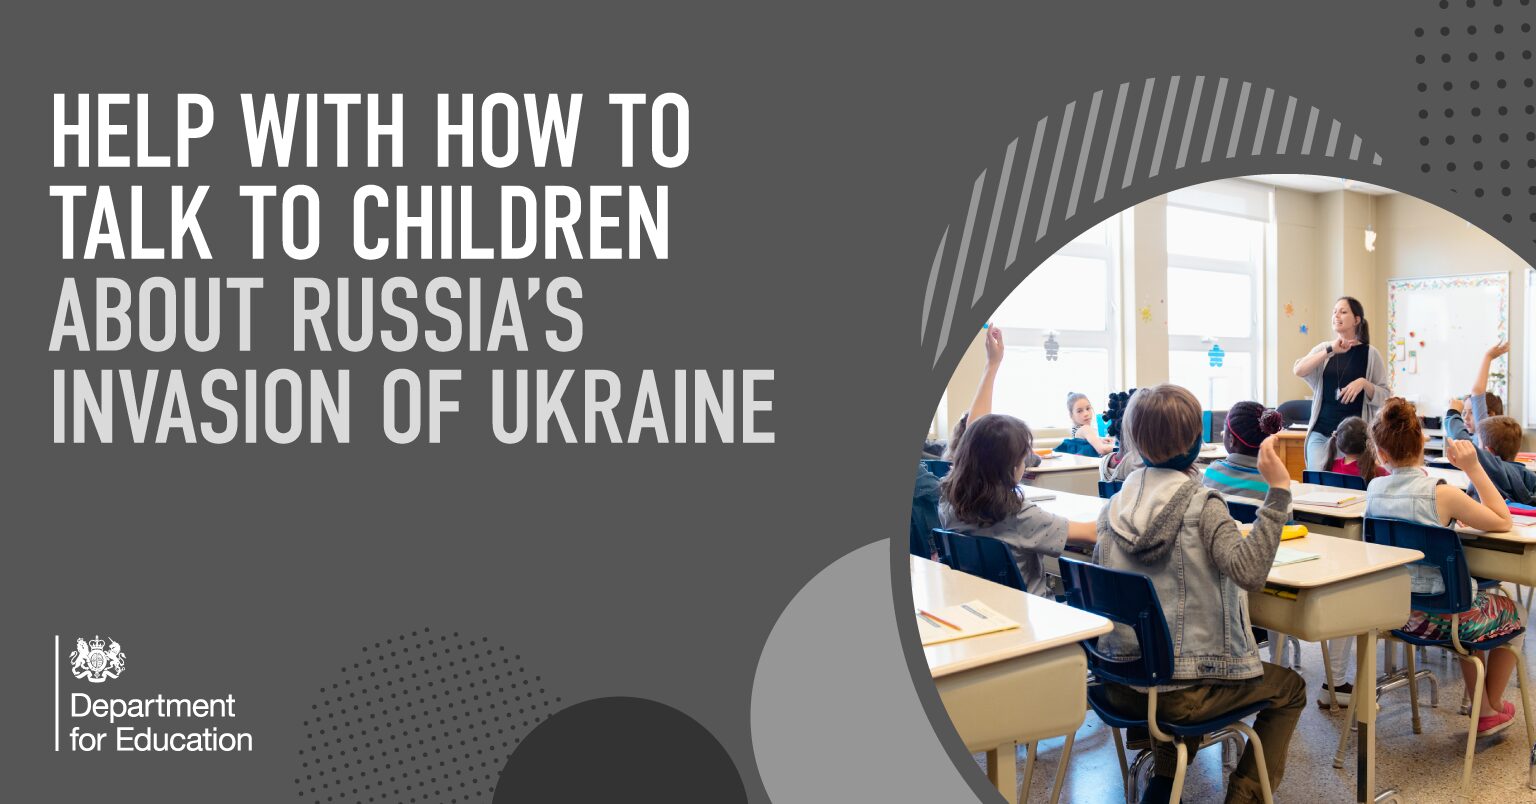 Help for teachers and families to talk to pupils about Russia's invasion of Ukraine and how to help them avoid misinformation.